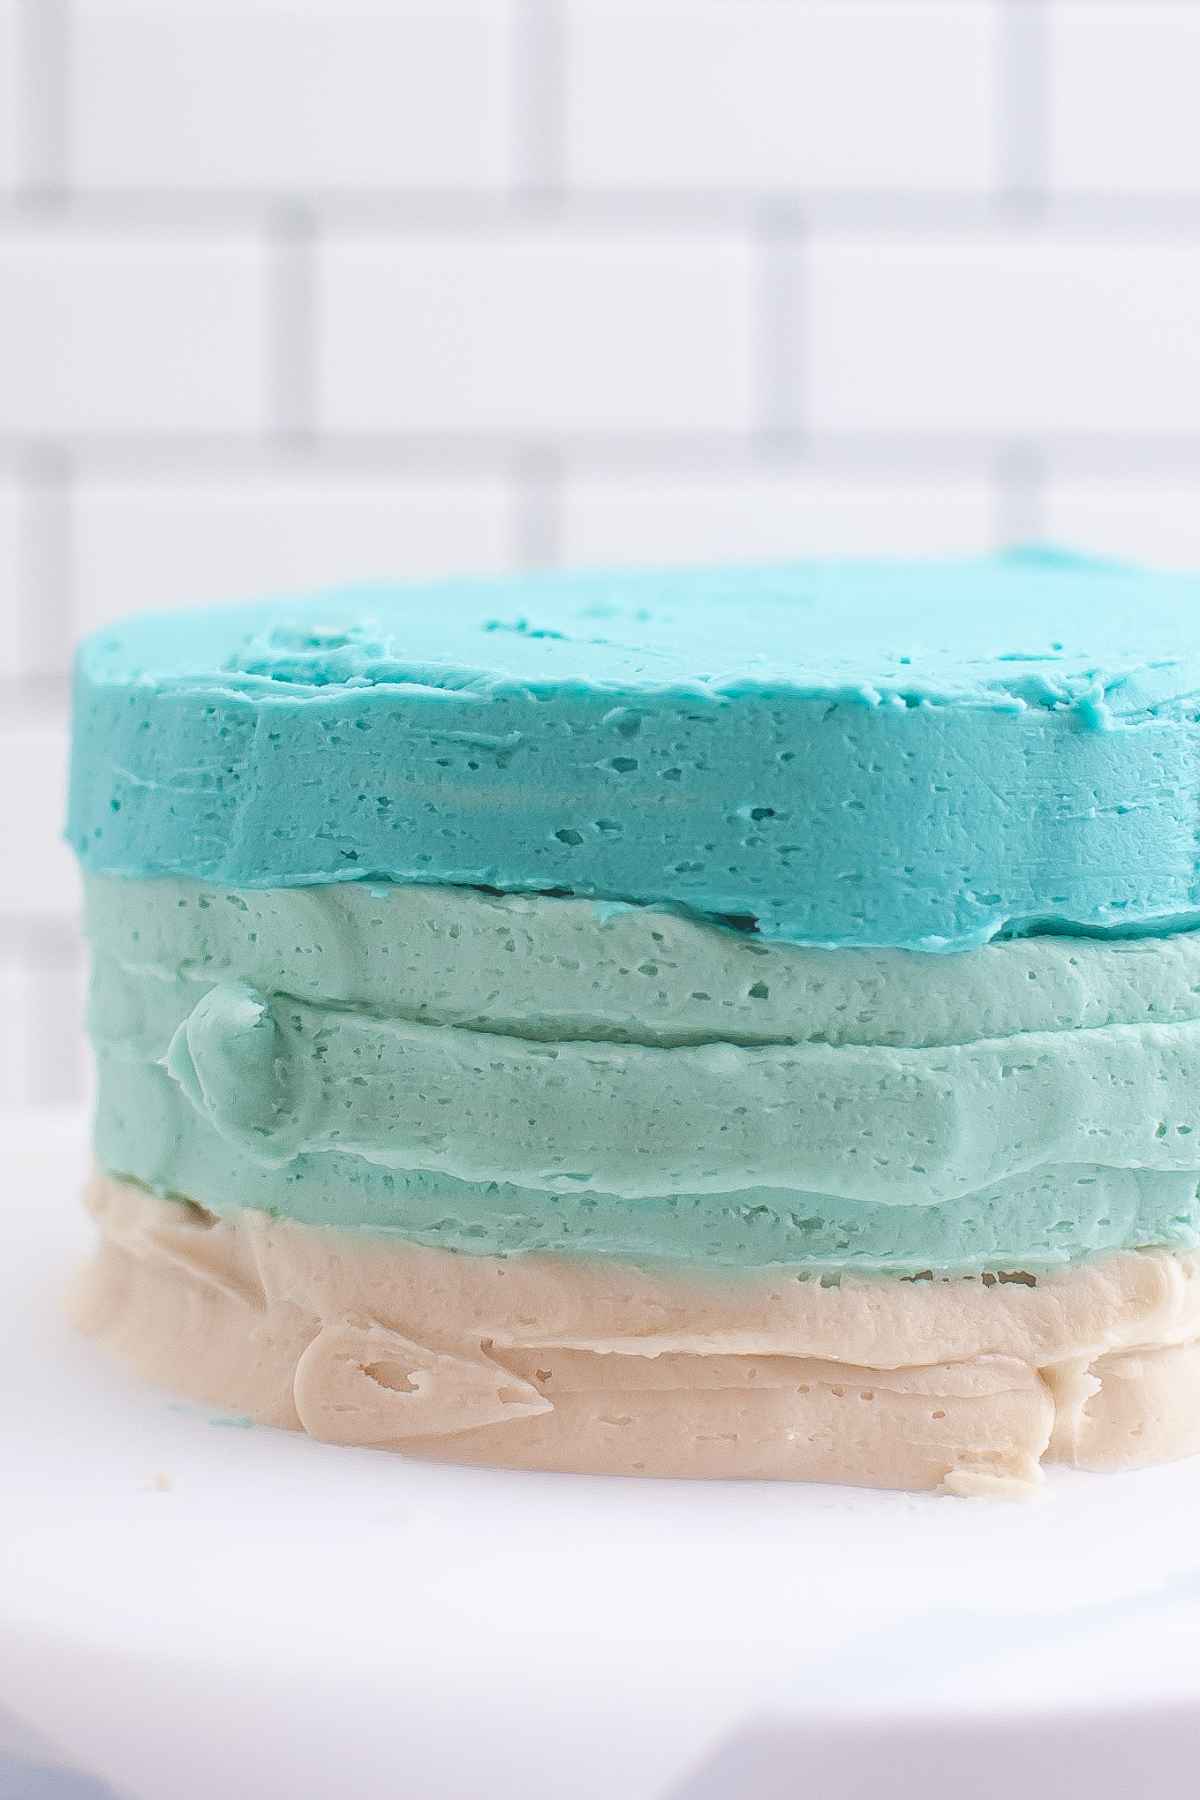 Layer cake with light blue, dark blue, and white frosting layers piped onto the sides of the cake.